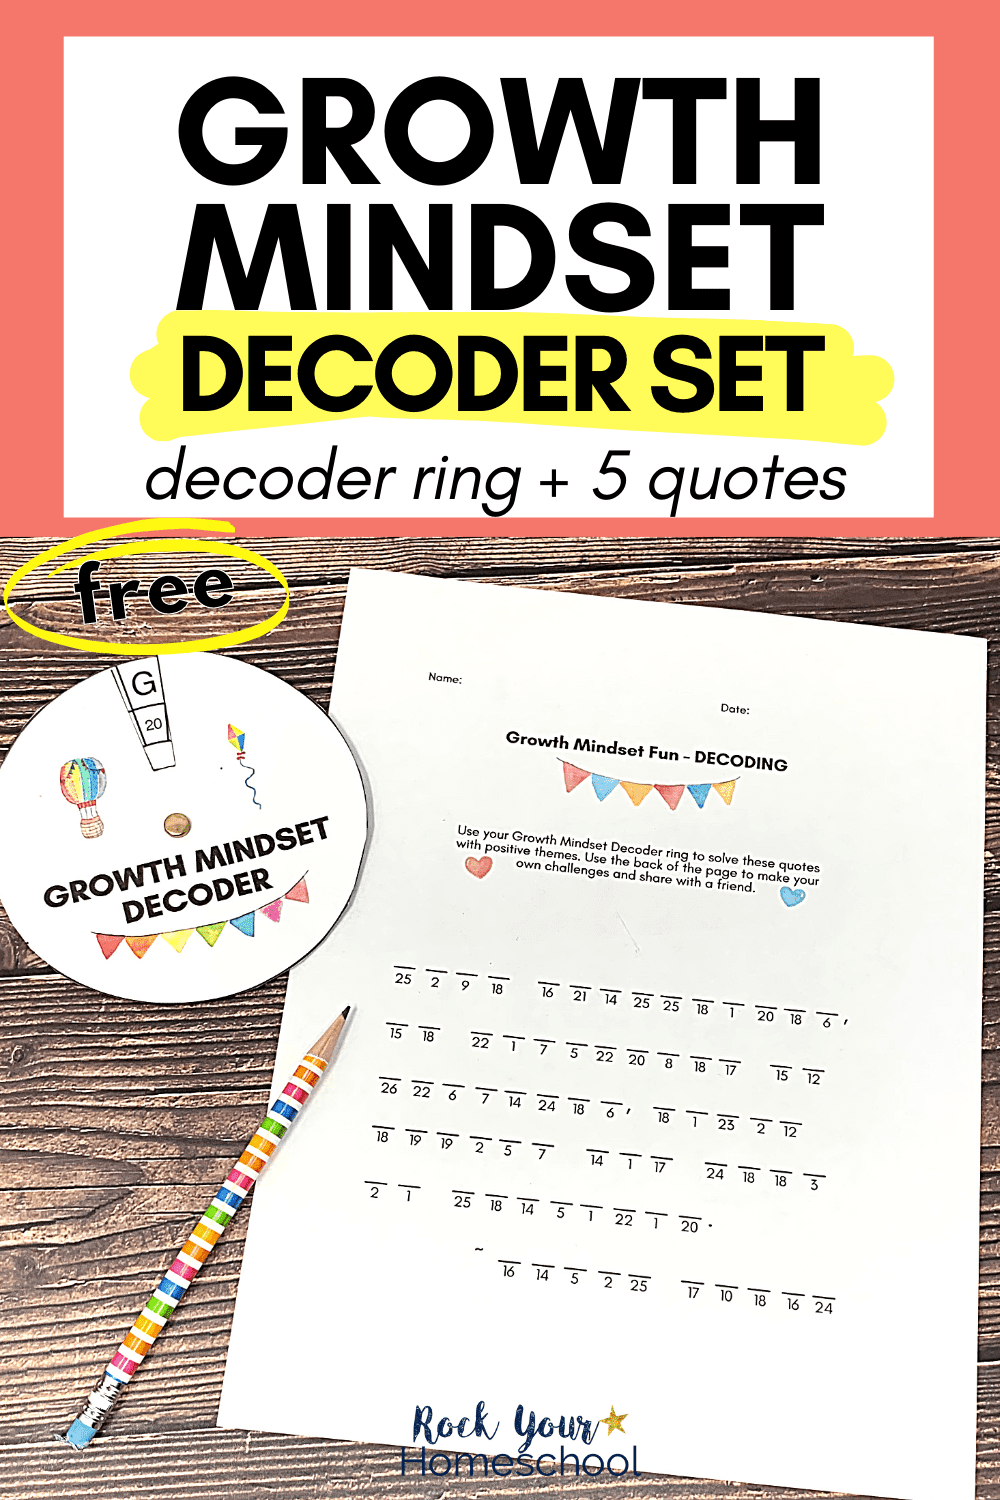 Growth Mindset Decoder Set: Fun & Free Way to Boost Learning